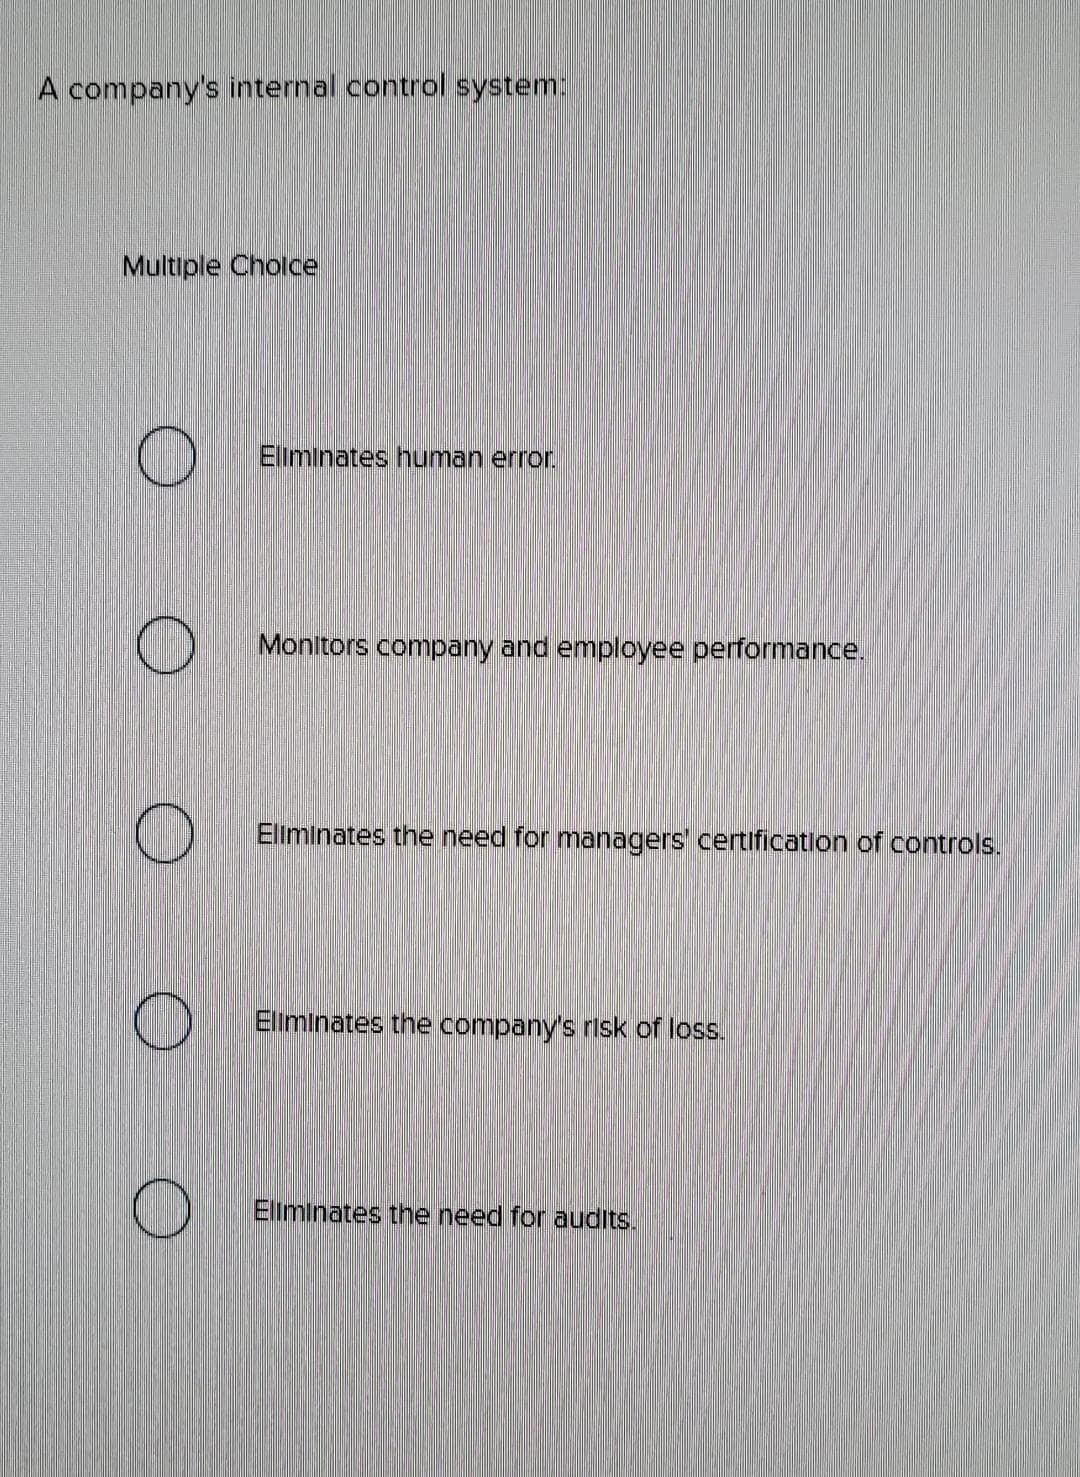 A company's internal control system:
Multiple Choice
O
O
O
Eliminates human error.
Monitors company and employee performance.
Eliminates the need for managers' certification of controls.
Eliminates the company's risk of loss.
Eliminates the need for audits.